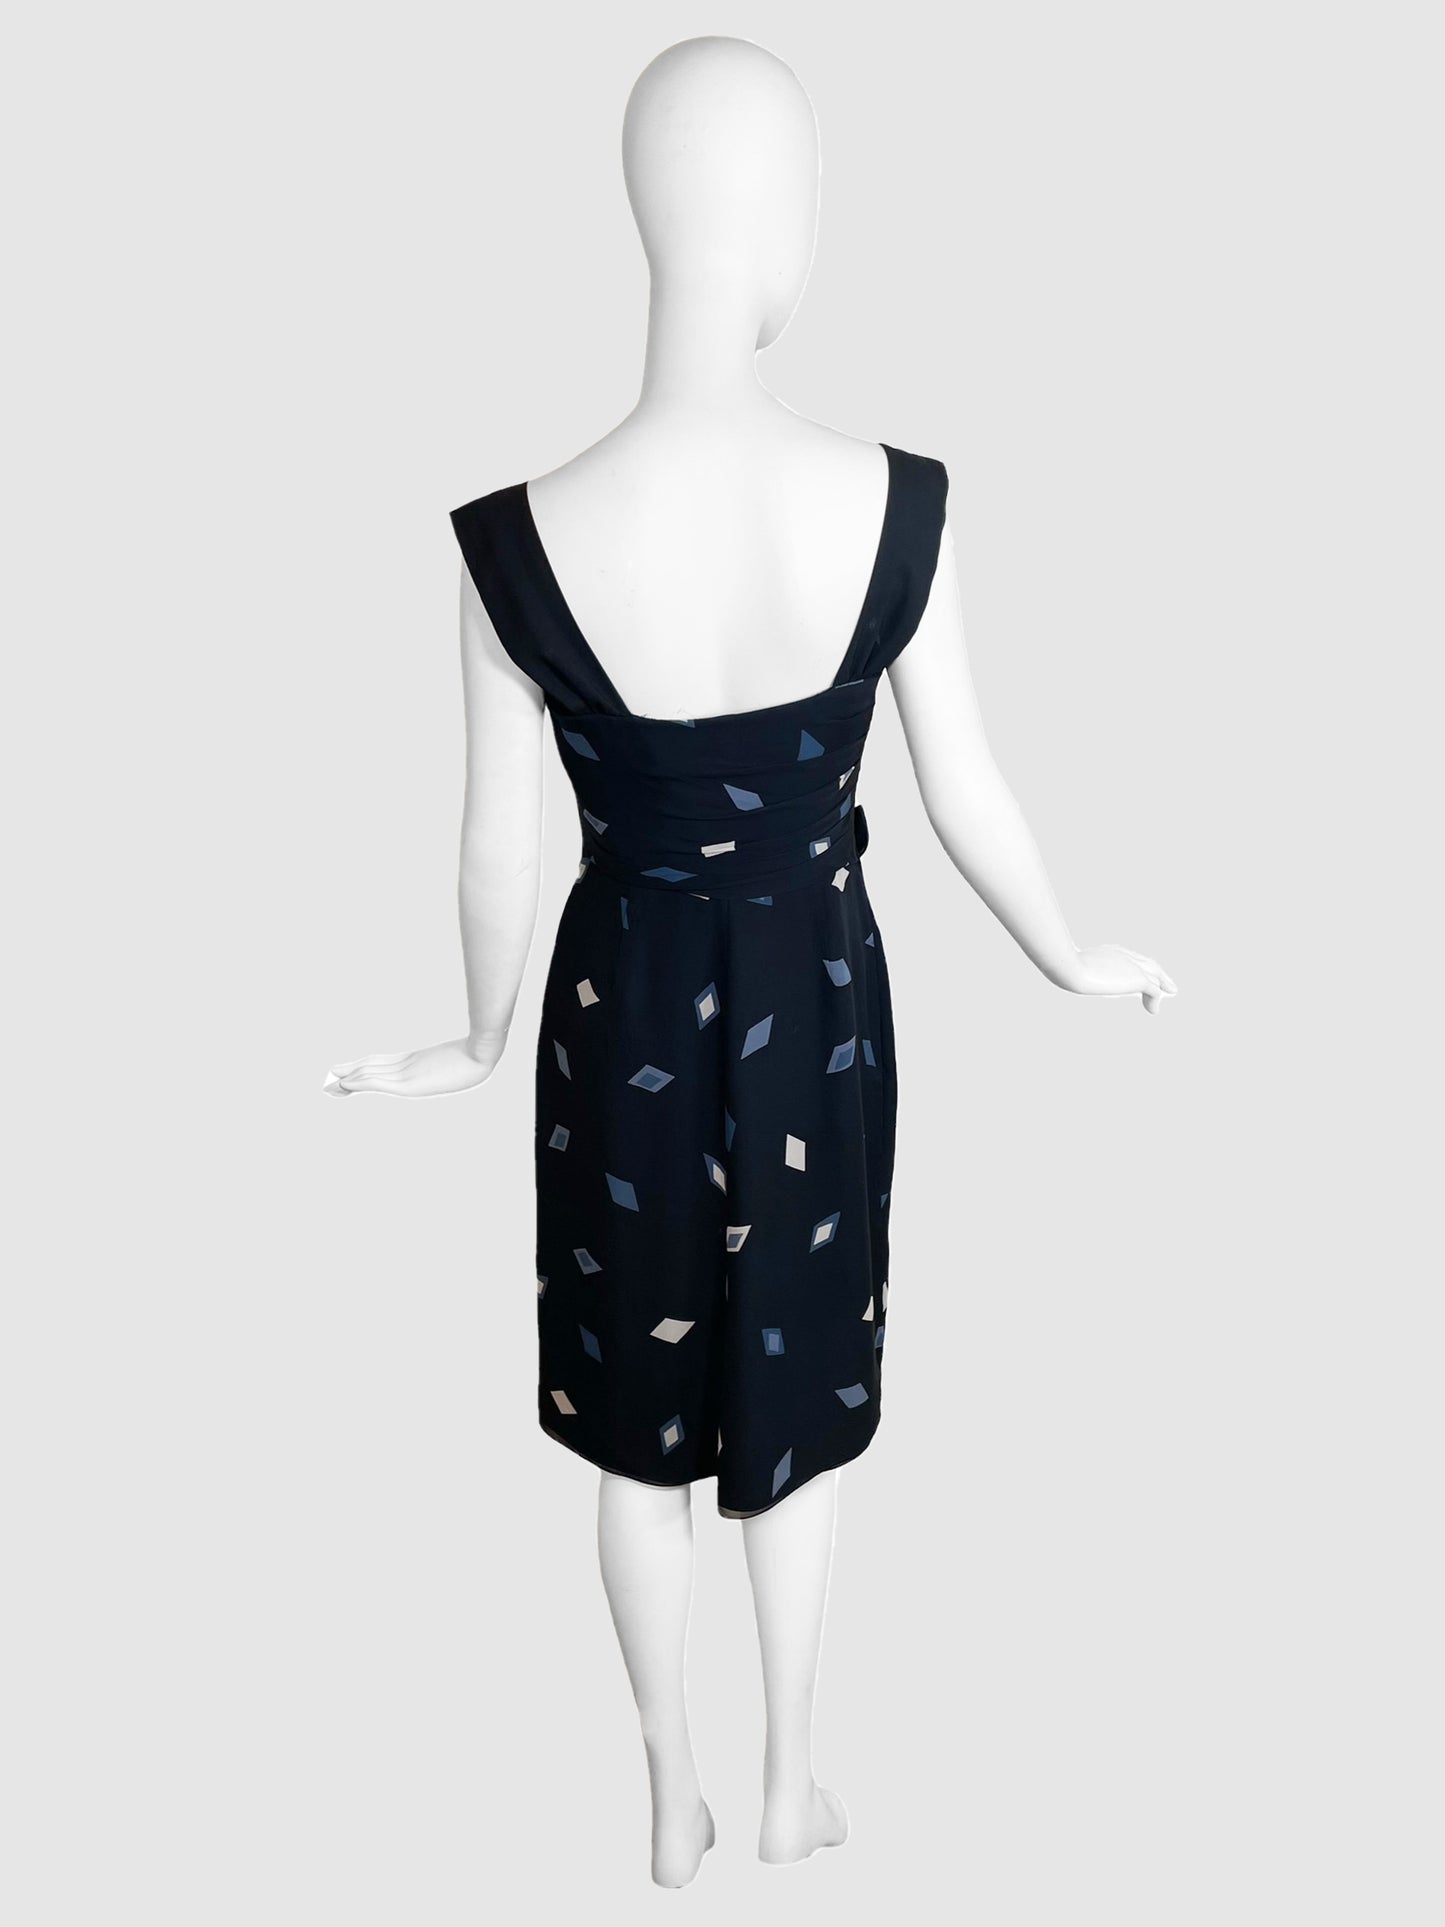 Armani Collezioni Patterned Dress with Rosettes - Size 8